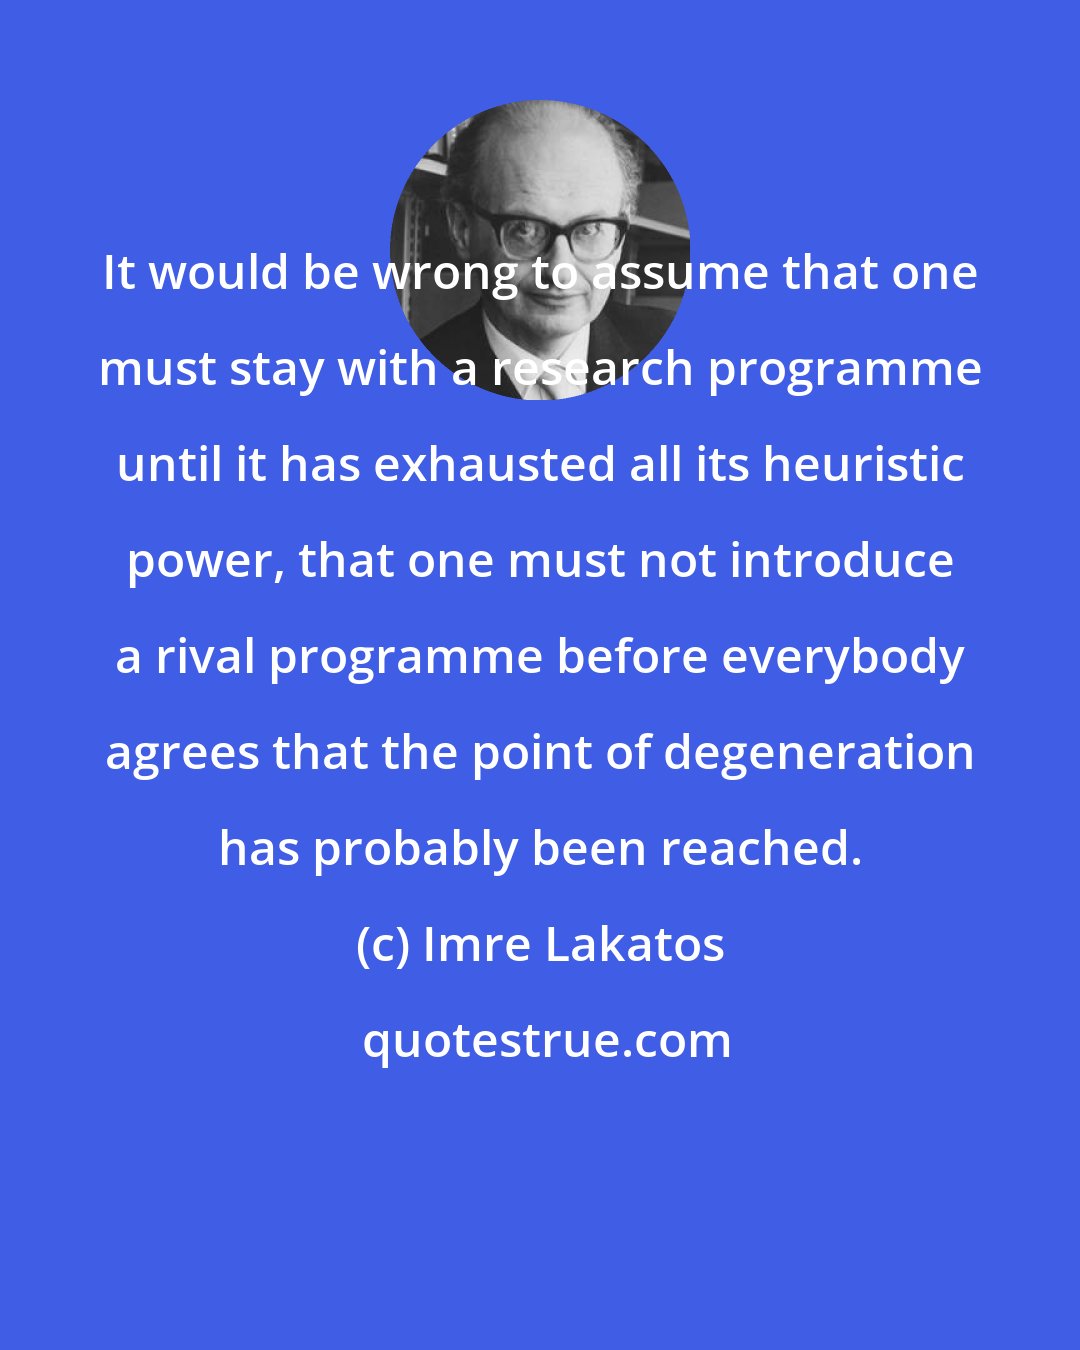 Imre Lakatos: It would be wrong to assume that one must stay with a research programme until it has exhausted all its heuristic power, that one must not introduce a rival programme before everybody agrees that the point of degeneration has probably been reached.